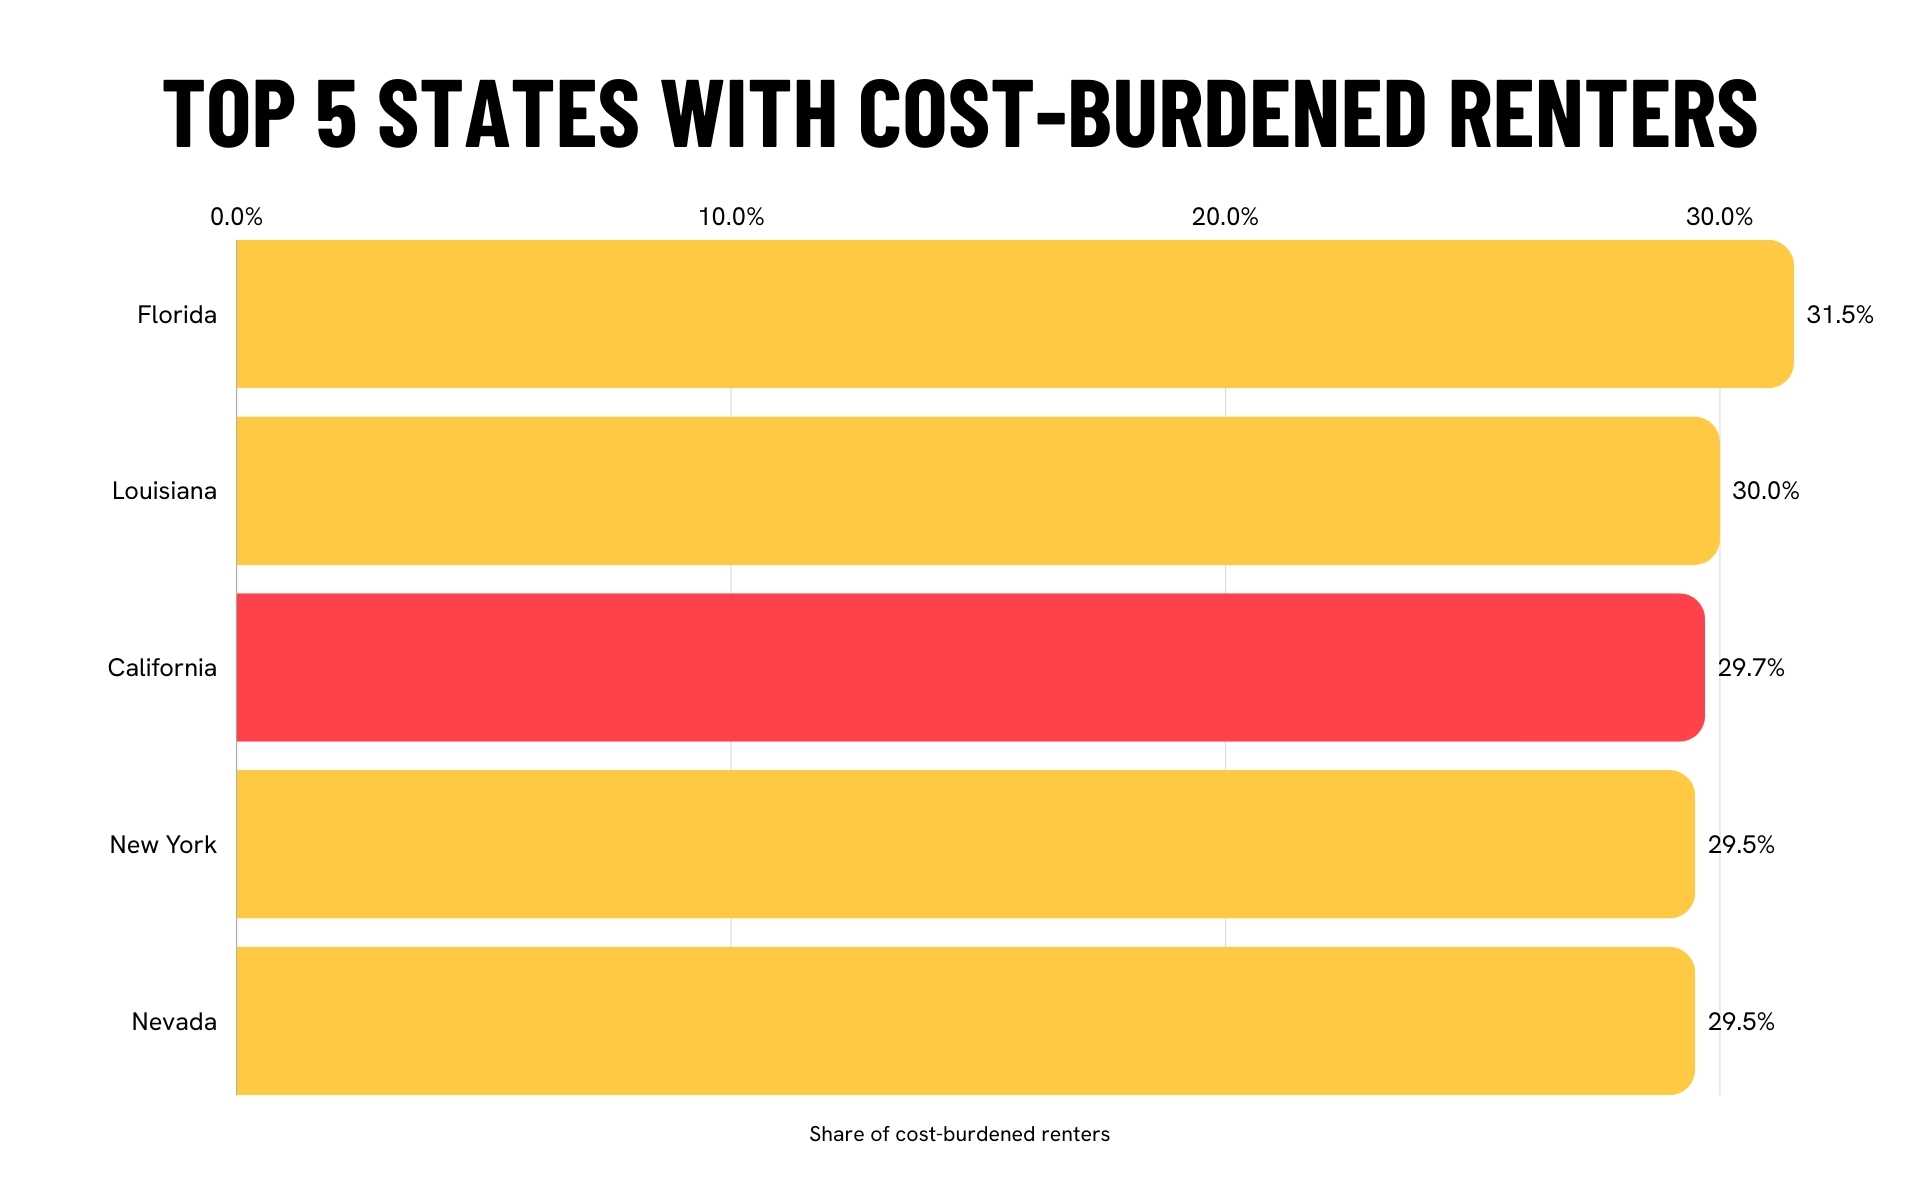 Creative Solutions to Affordable Housing — A gold and red horizontal bar chart showing the top 5 states with cost-burdened renters. 1. Florida at 31.5% share of cost-burdened renters. 2. Louisiana with 30%. 3. California with 29.7%. 4. New York with 29.5%. 5. Nevada with 29.5%